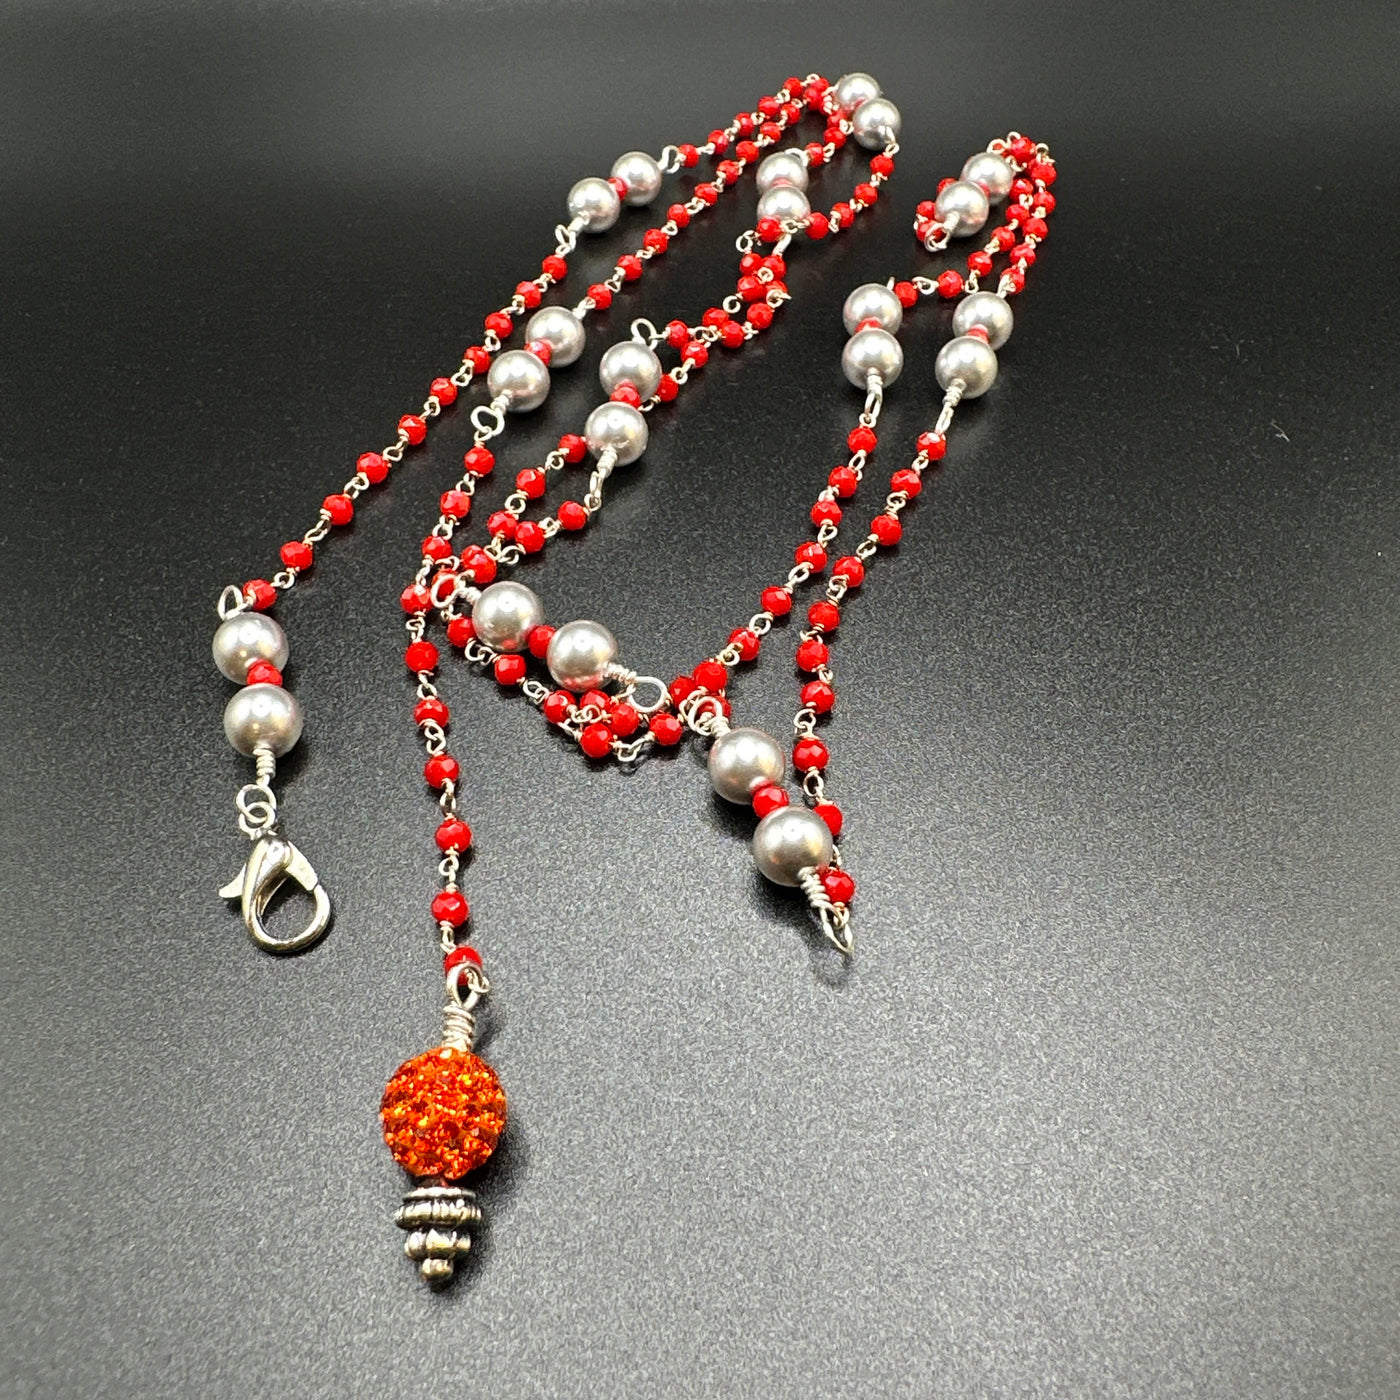 Scarf necklace silver 925 with red beads and light grey pearls